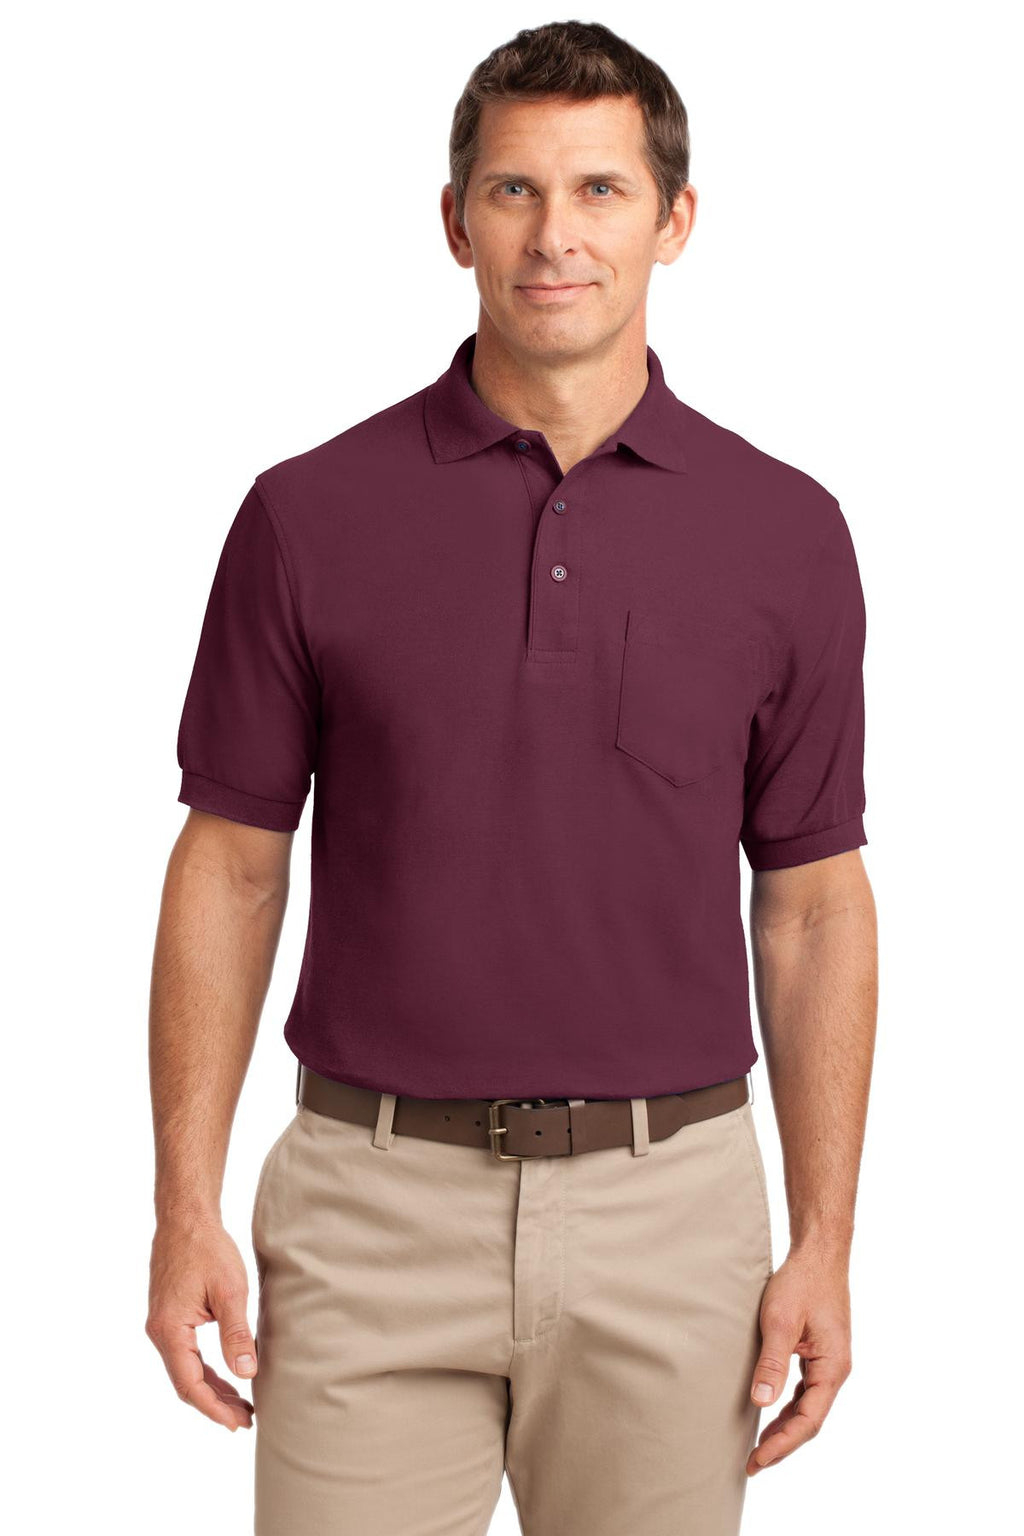 Port Authority Men's Silk Touch Polo Shirt With Pocket-5